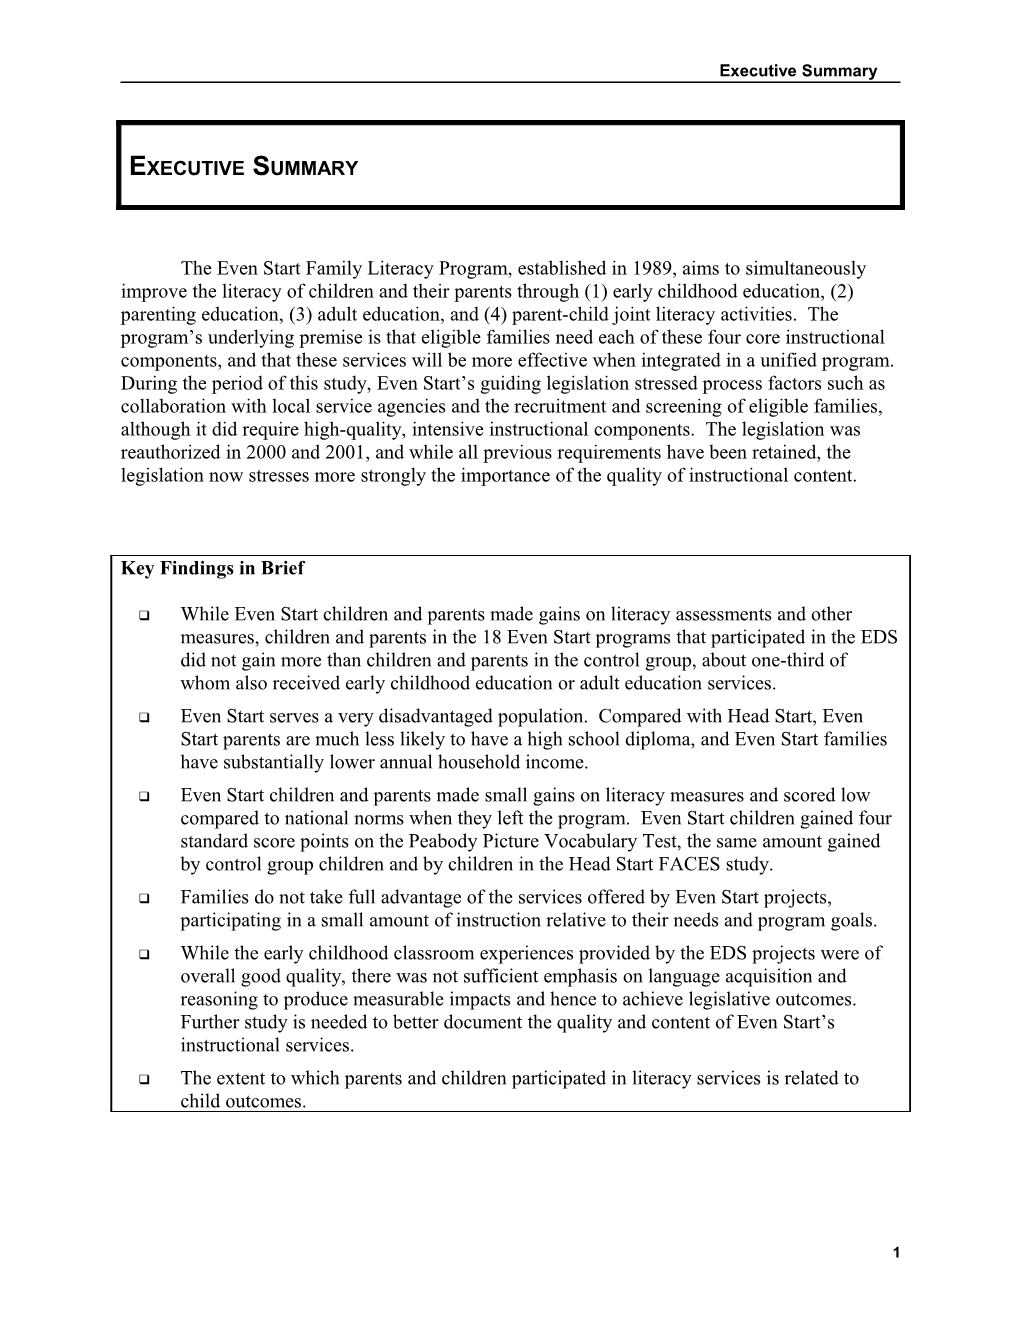 EXECUTIVE SUMMARY THIRD NATIONAL EVEN START EVALUATION (Msword)